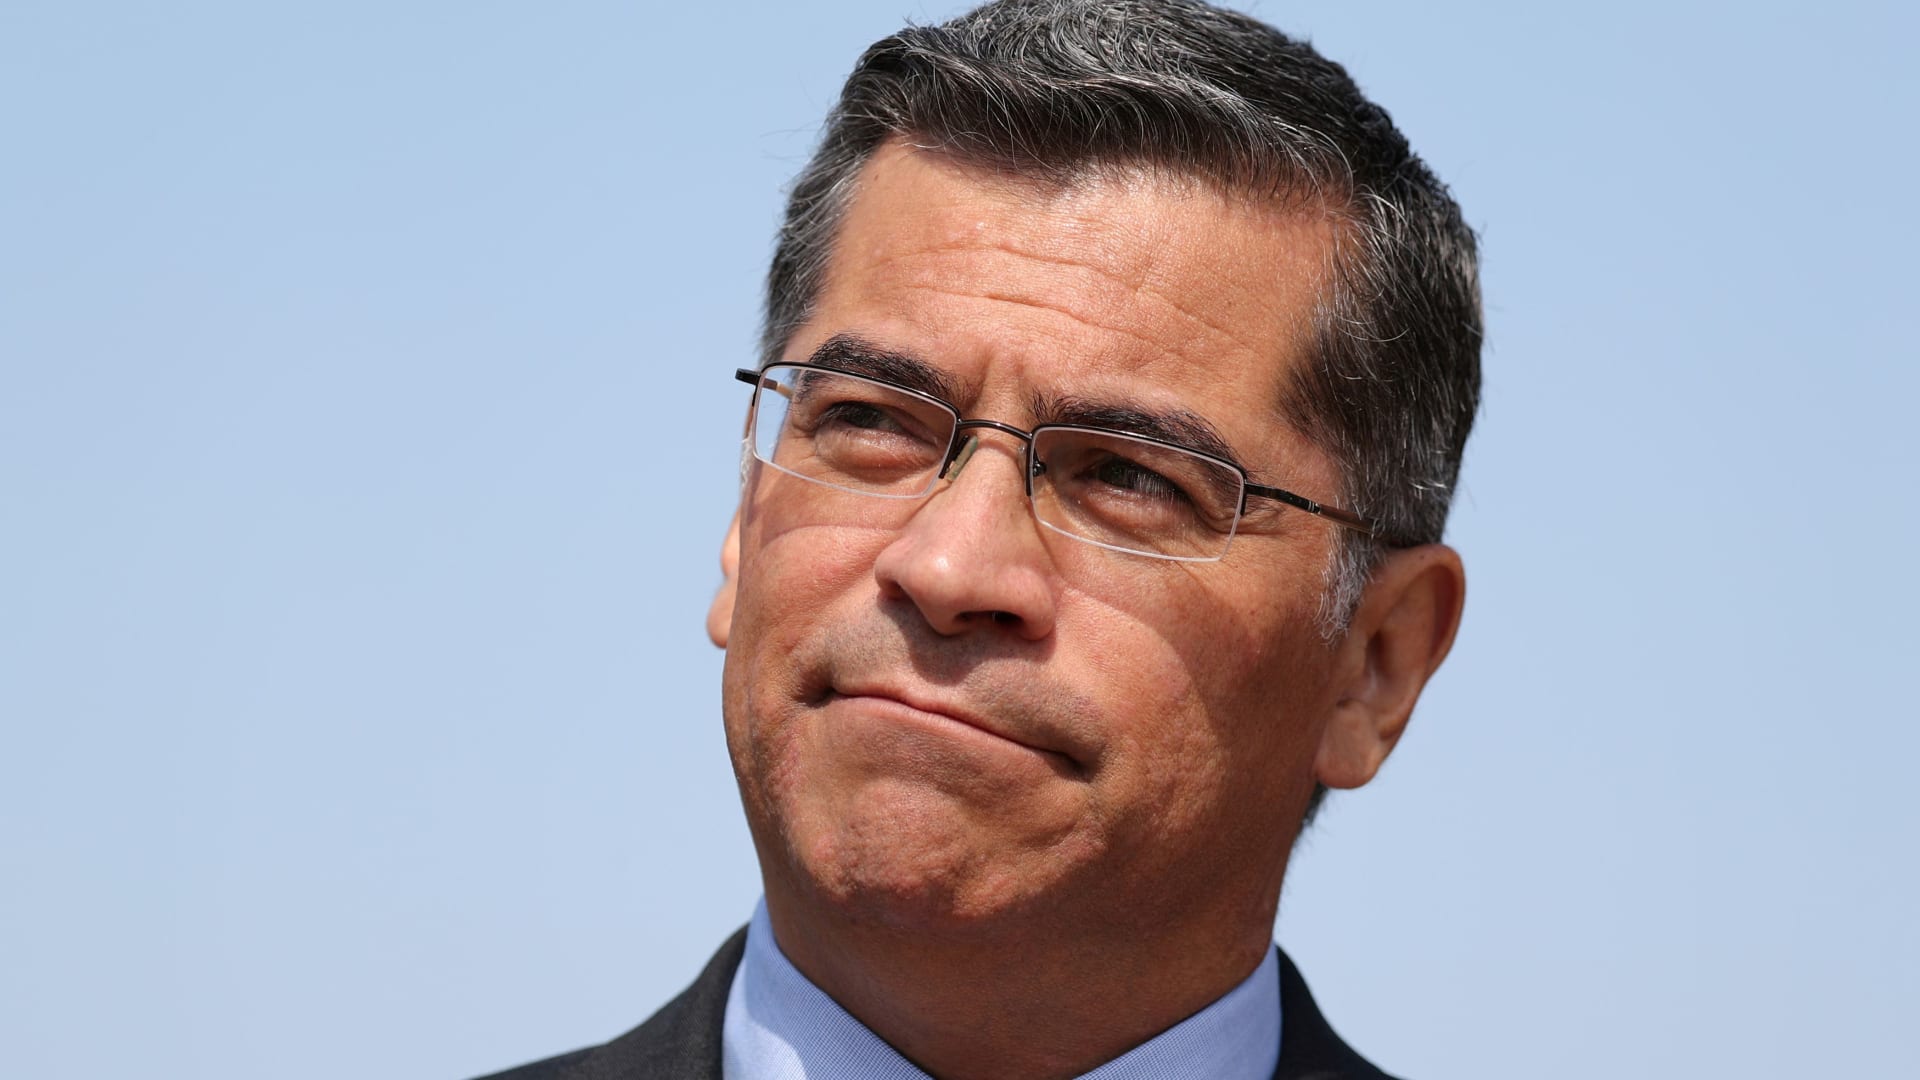 Biden picks Xavier Becerra, who has led the defense of Obamacare, to run Health and Human Services